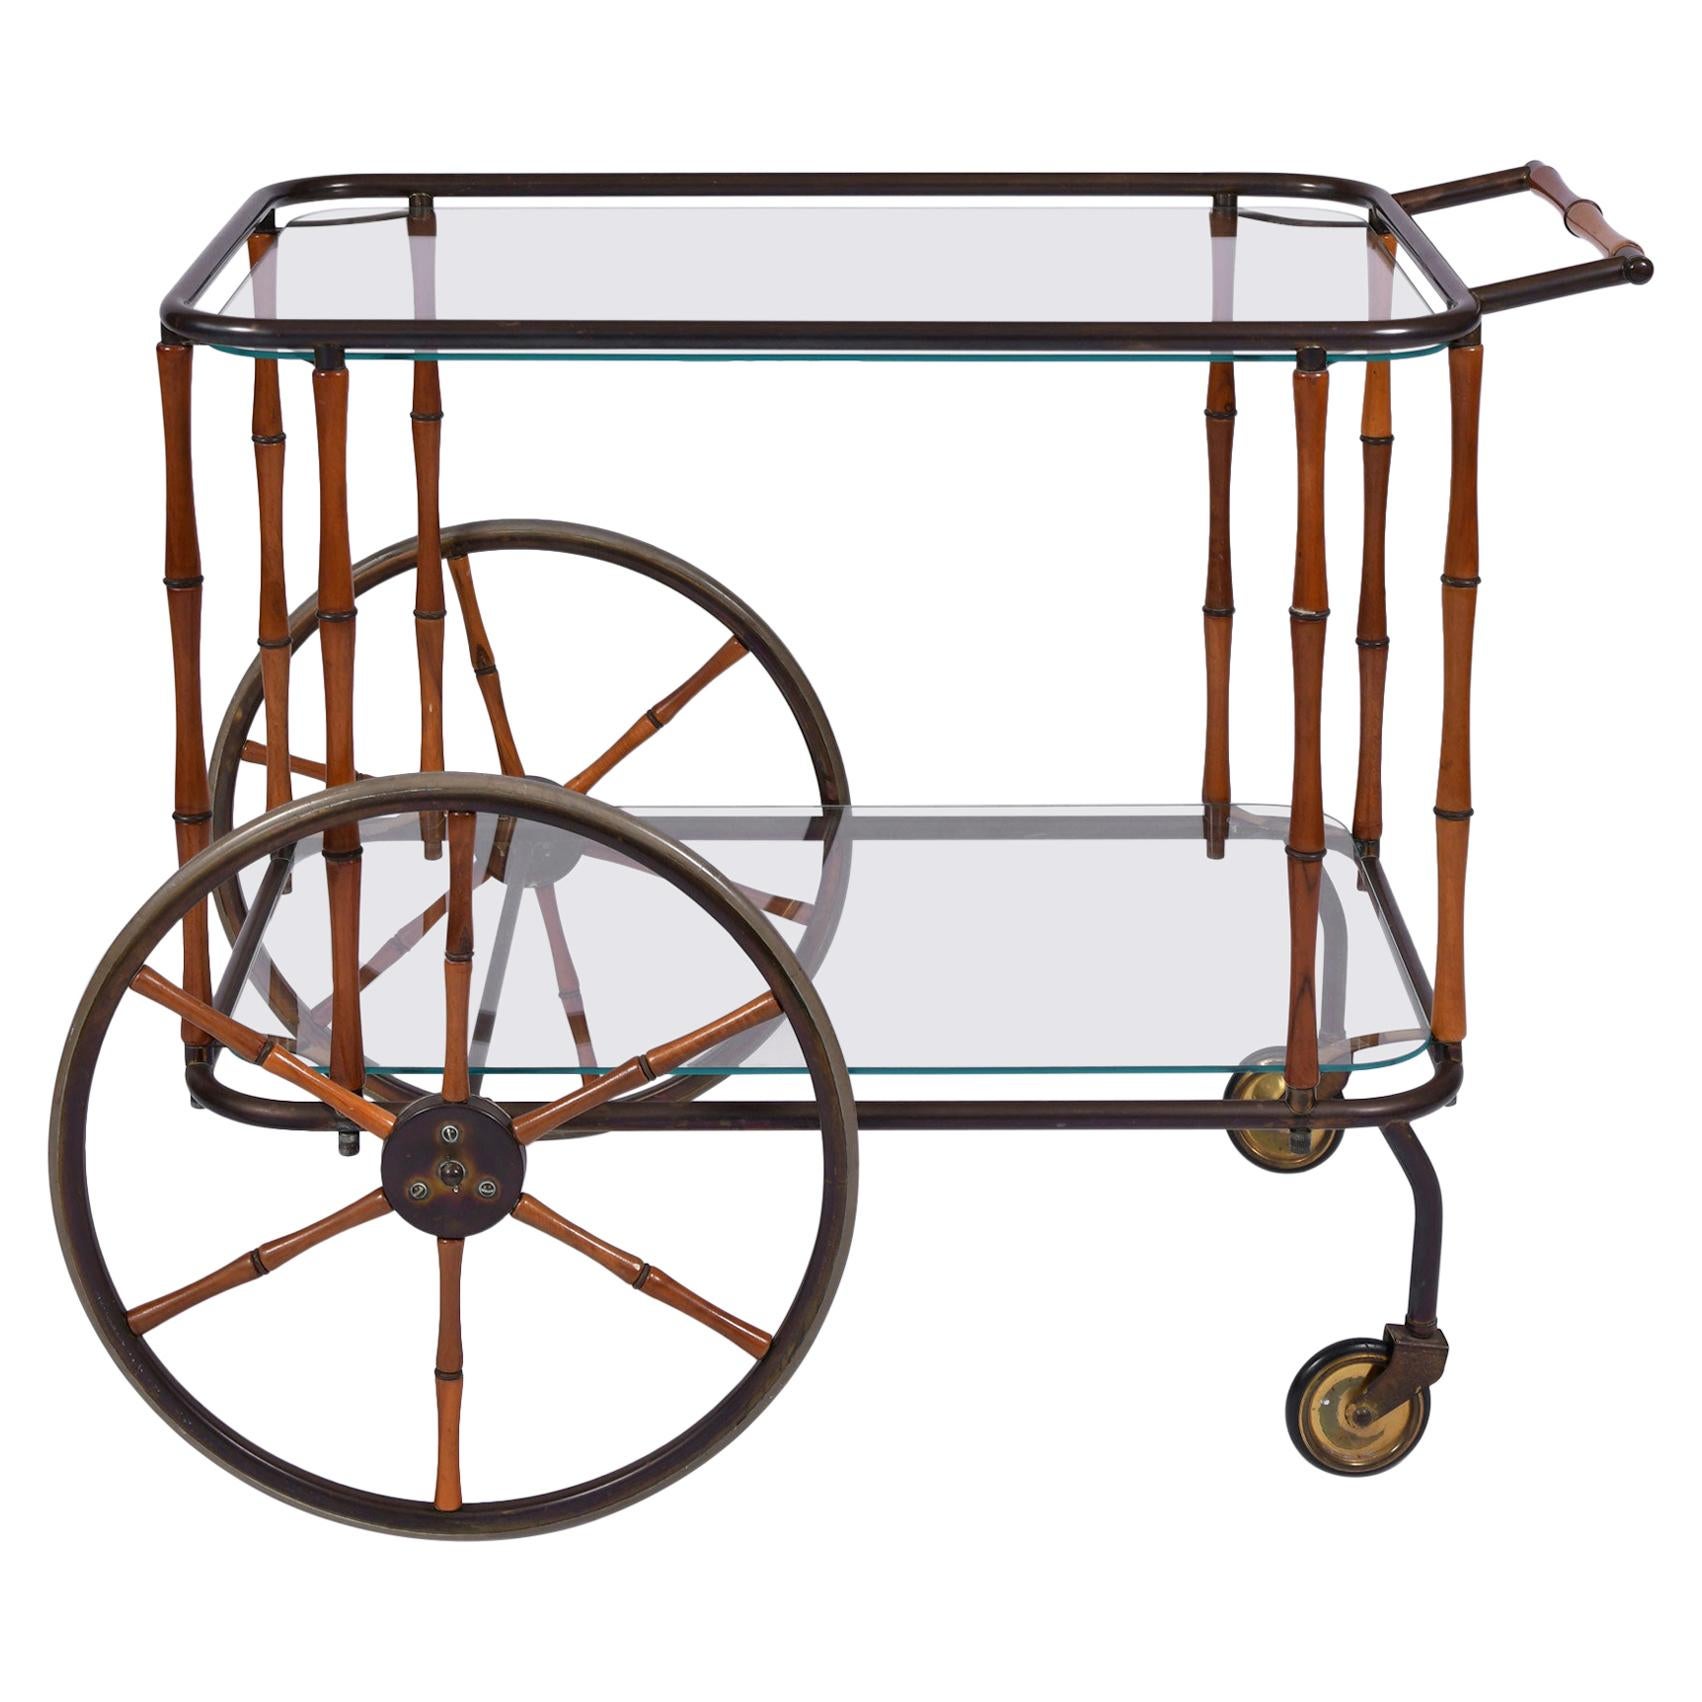 1960s French Brass and Bamboo Drinks Trolley/ Bar Cart by Maison Jansen